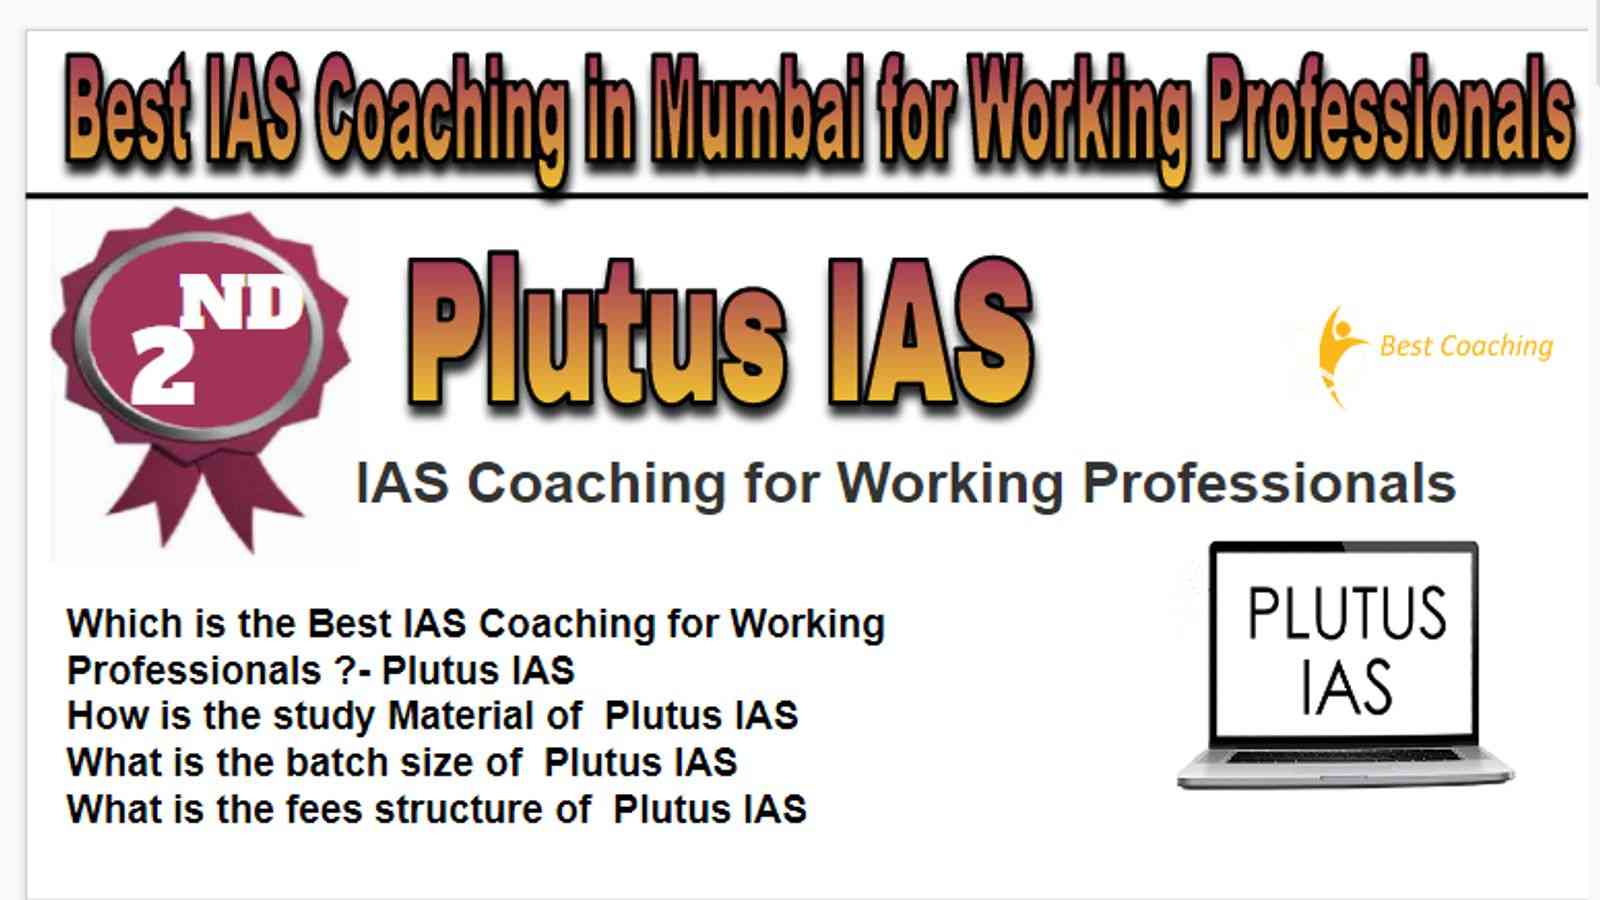 Rank 2 Best IAS Coaching in Mumbai for Working Professionals